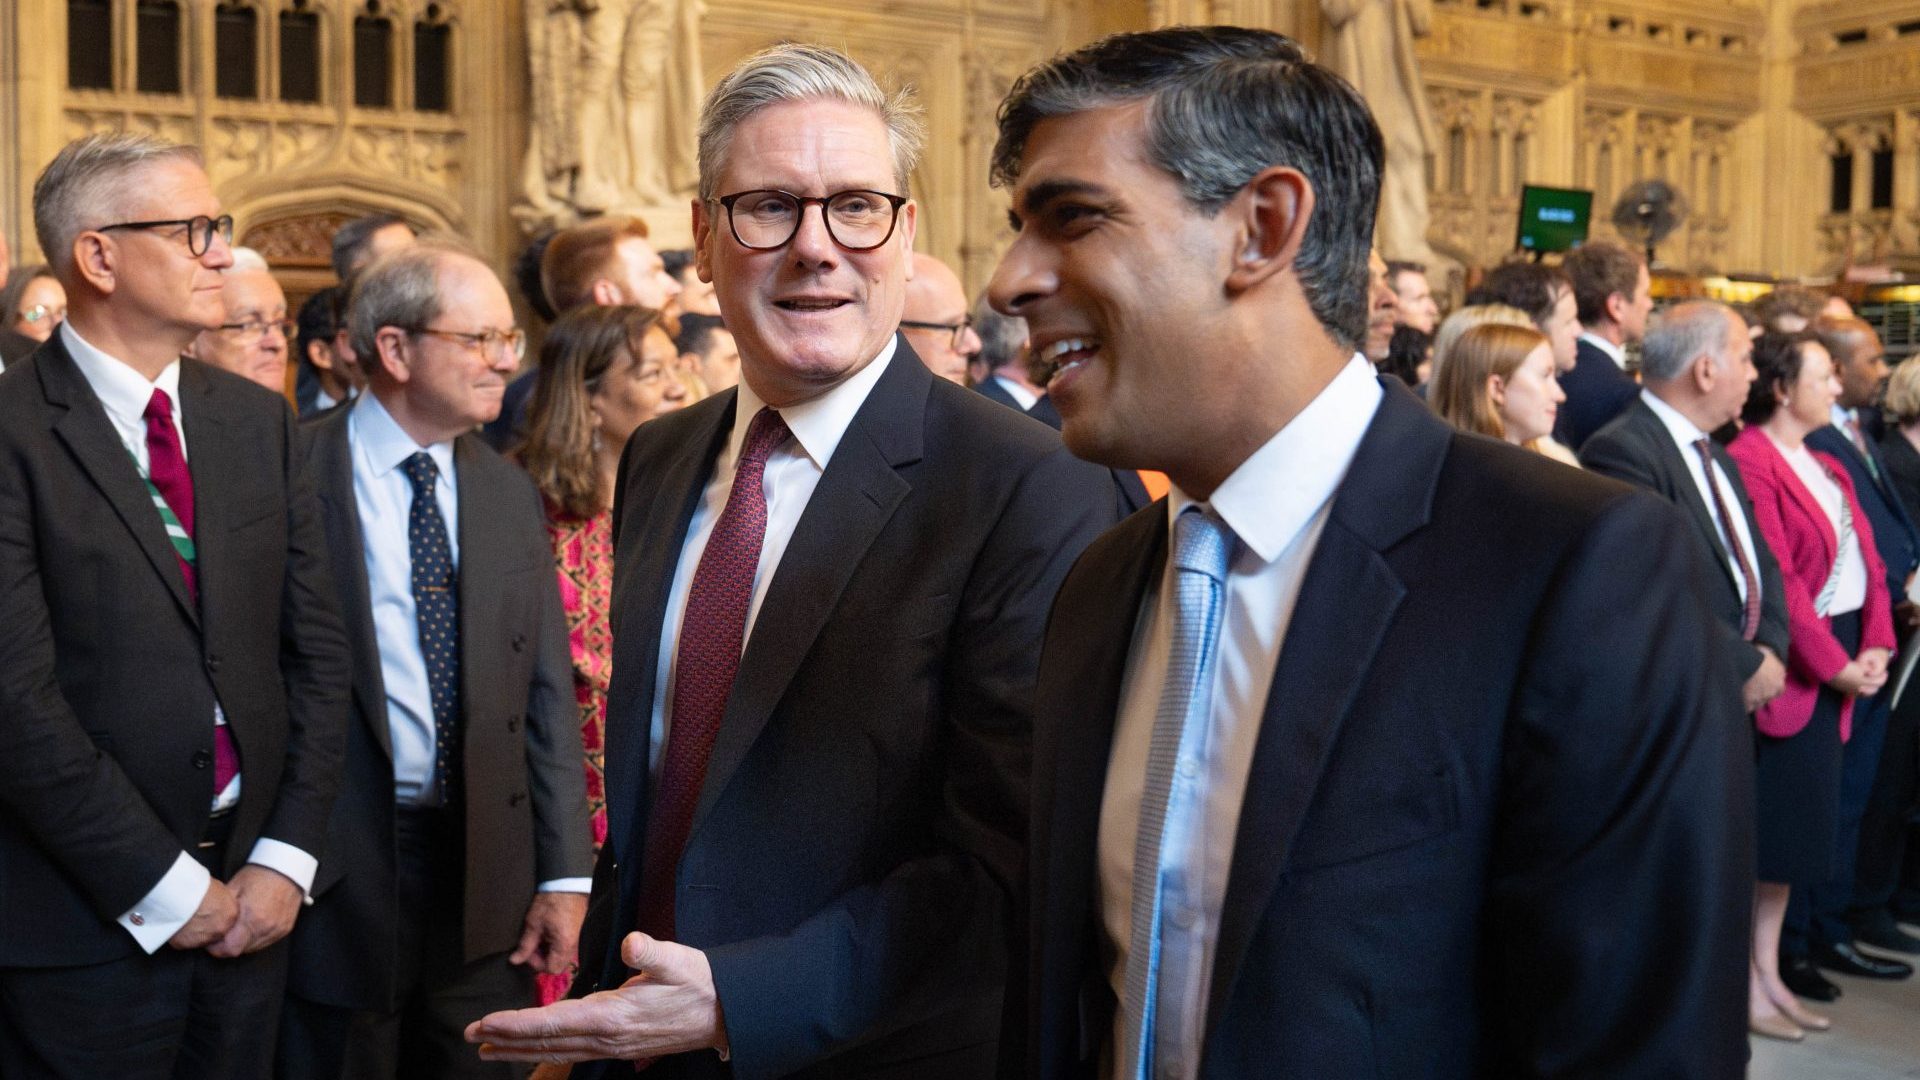 Keir Starmer and Rishi Sunak talk as they walk through the Member's Lobby of the Houses of Parliament to the House of Lords to hear the King's Speech (Photo by Stefan Rousseau - WPA Pool/Getty Images)